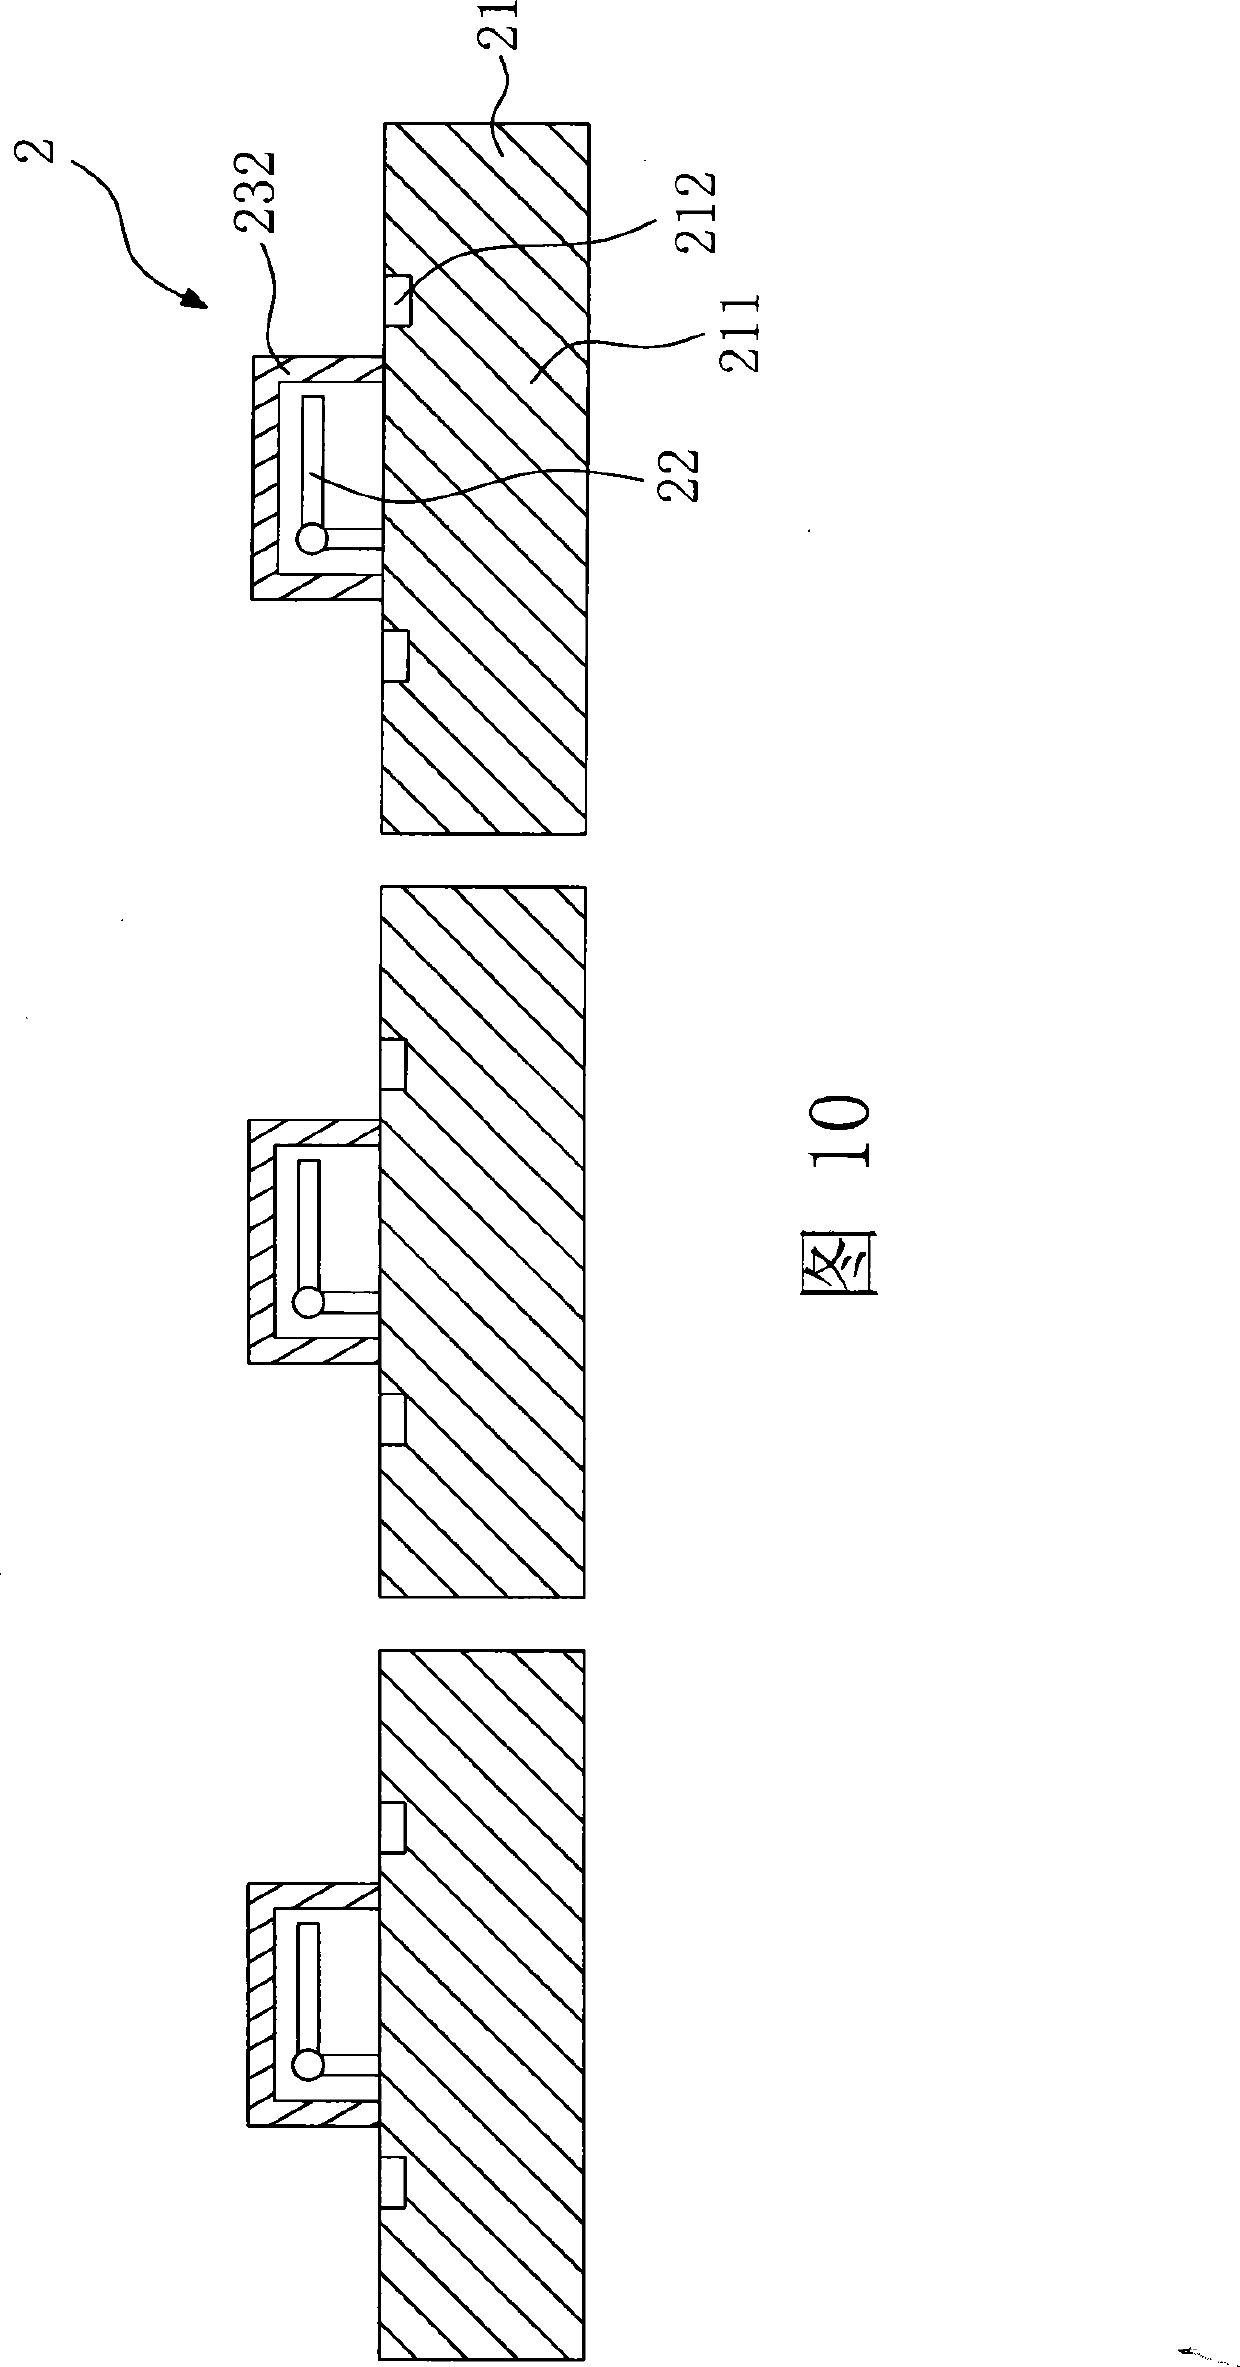 Method for manufacturing semiconductor package structure having micro electro-mechanical system